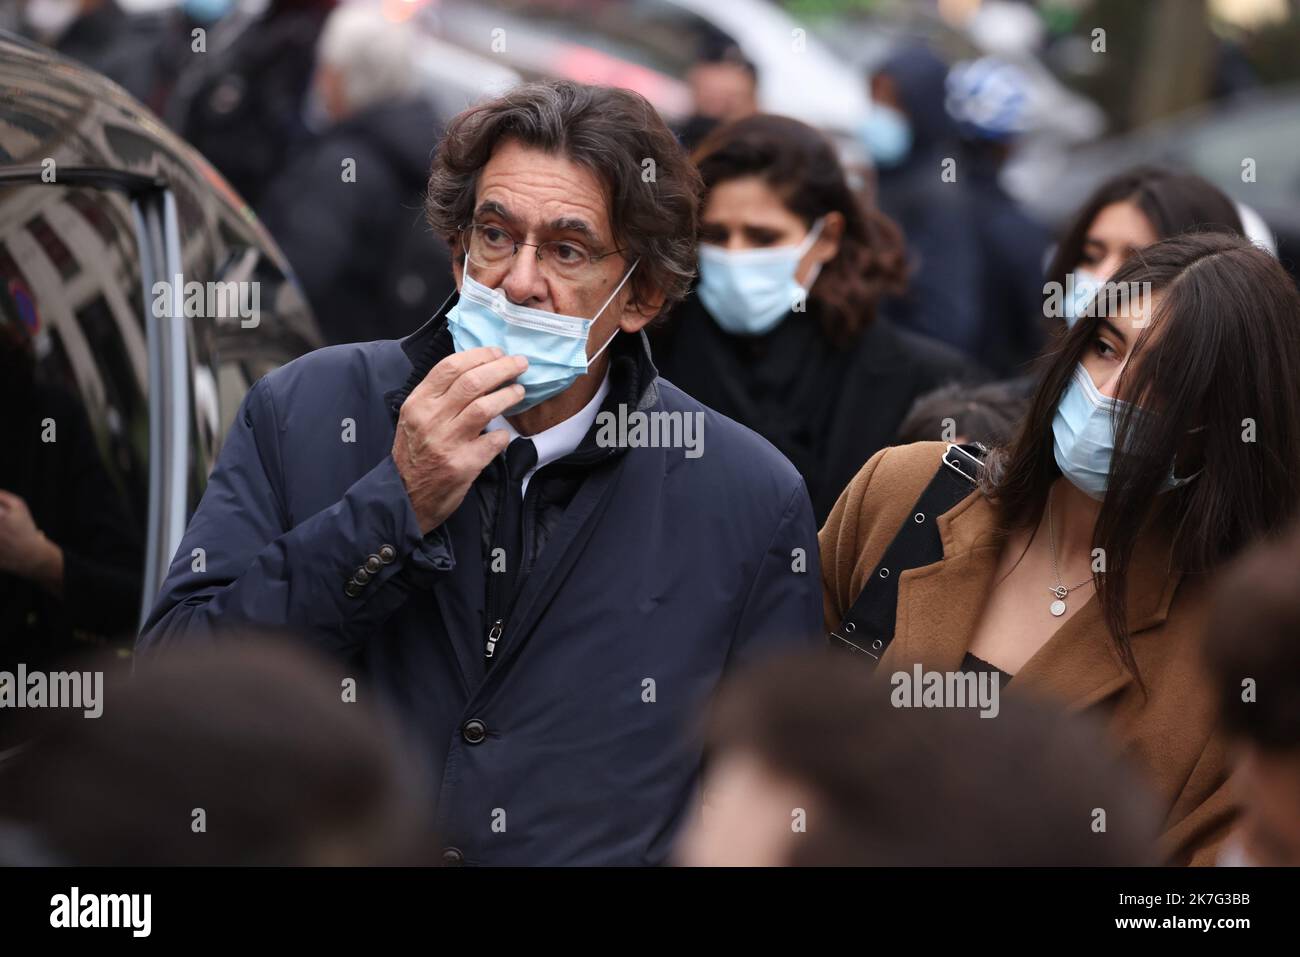 ©PHOTOPQR/LE PARISIEN/LP / Arnaud Journois ; PARIS ; 10/01/2022 ; OBSEQUES DES FRERES IGOR ET GRICHKA BOGDANOFF A LA MADELEINE A PARIS LUC FERRY - Paris, France, jan 10th 2021. Igor and Grichka Bogdanoff, known as brothers Bogdanoff, funerals Twin brothers died six days apart from Covid-19 A mass in homage to Igor and Grichka Bogdanoff will be celebrated Monday at 3 p.m. in the Madeleine church in Paris, the family announced on Wednesday in a statement. 'Their burial will take place in strict privacy,' adds the short text sent by the agent of the famous twins carried away by the Covid-19 six d Stock Photo